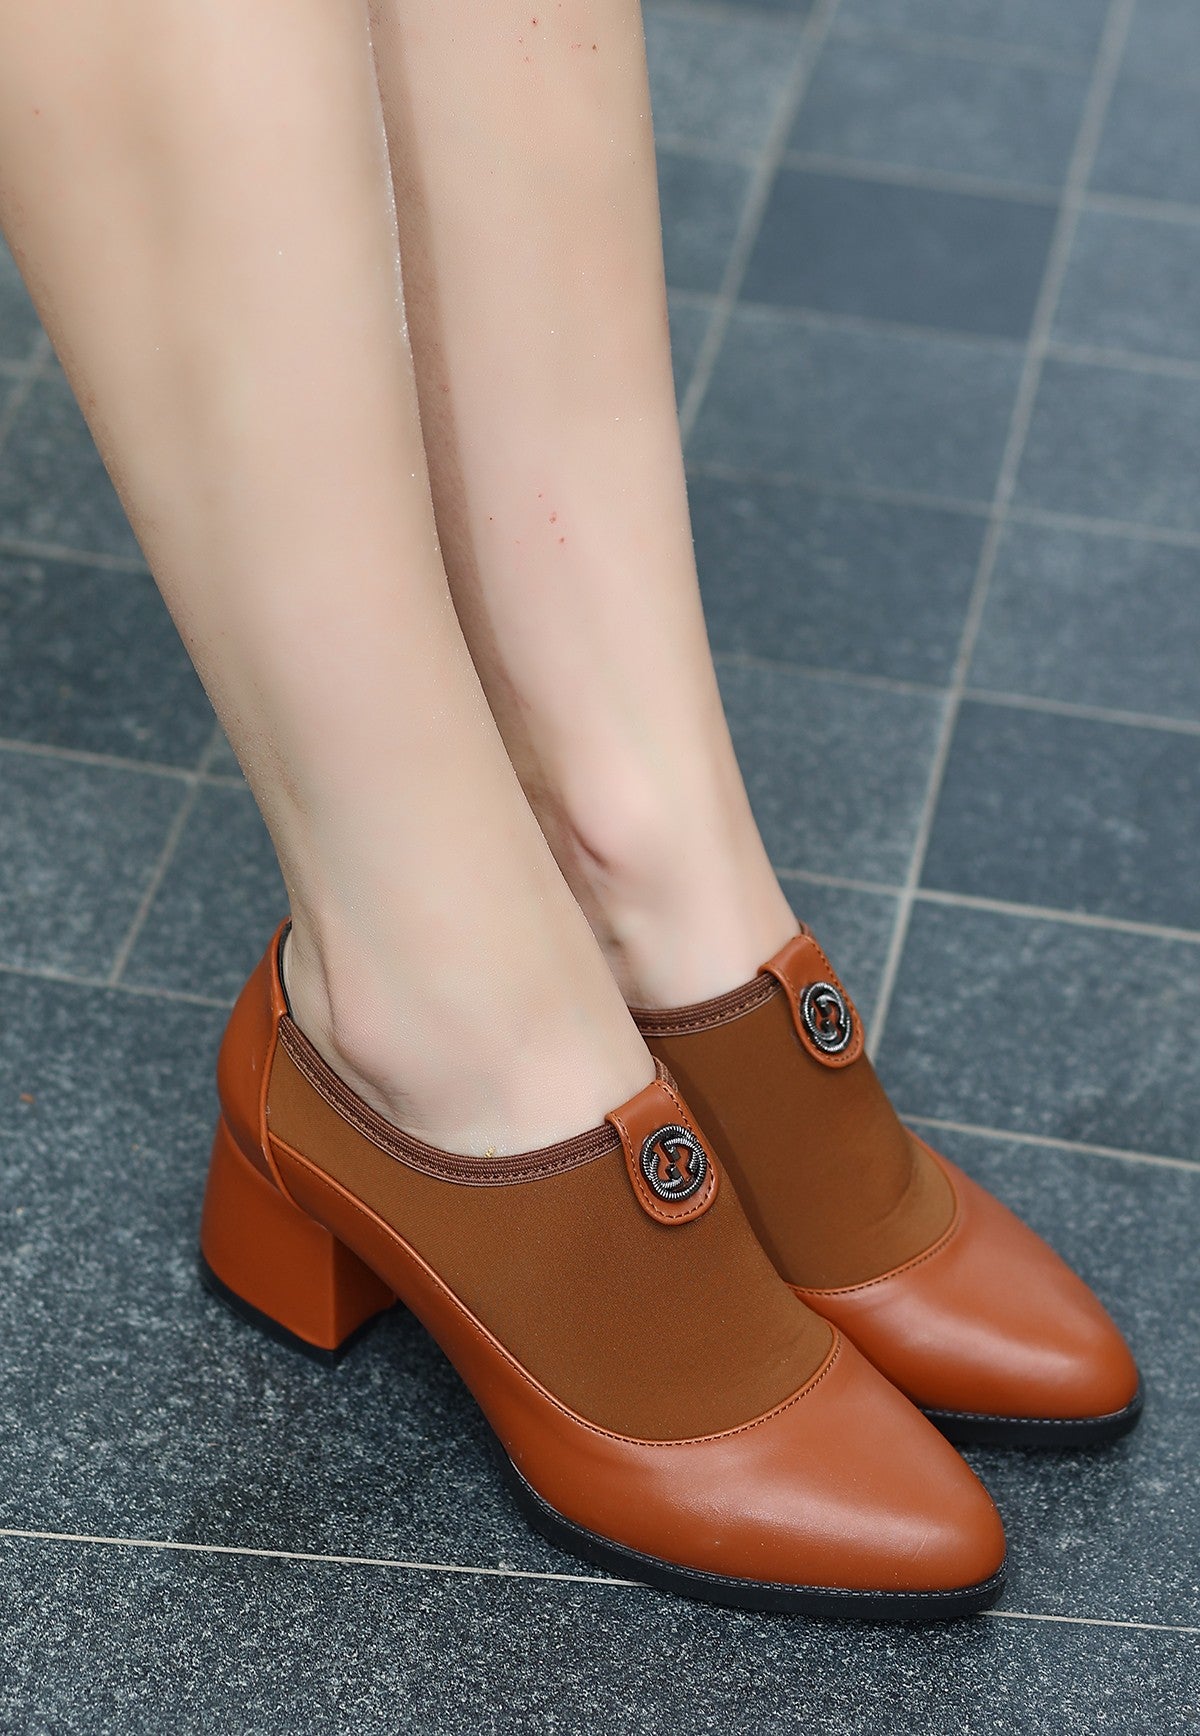 Women's Brown Leather Heeled Shoes - STREETMODE™